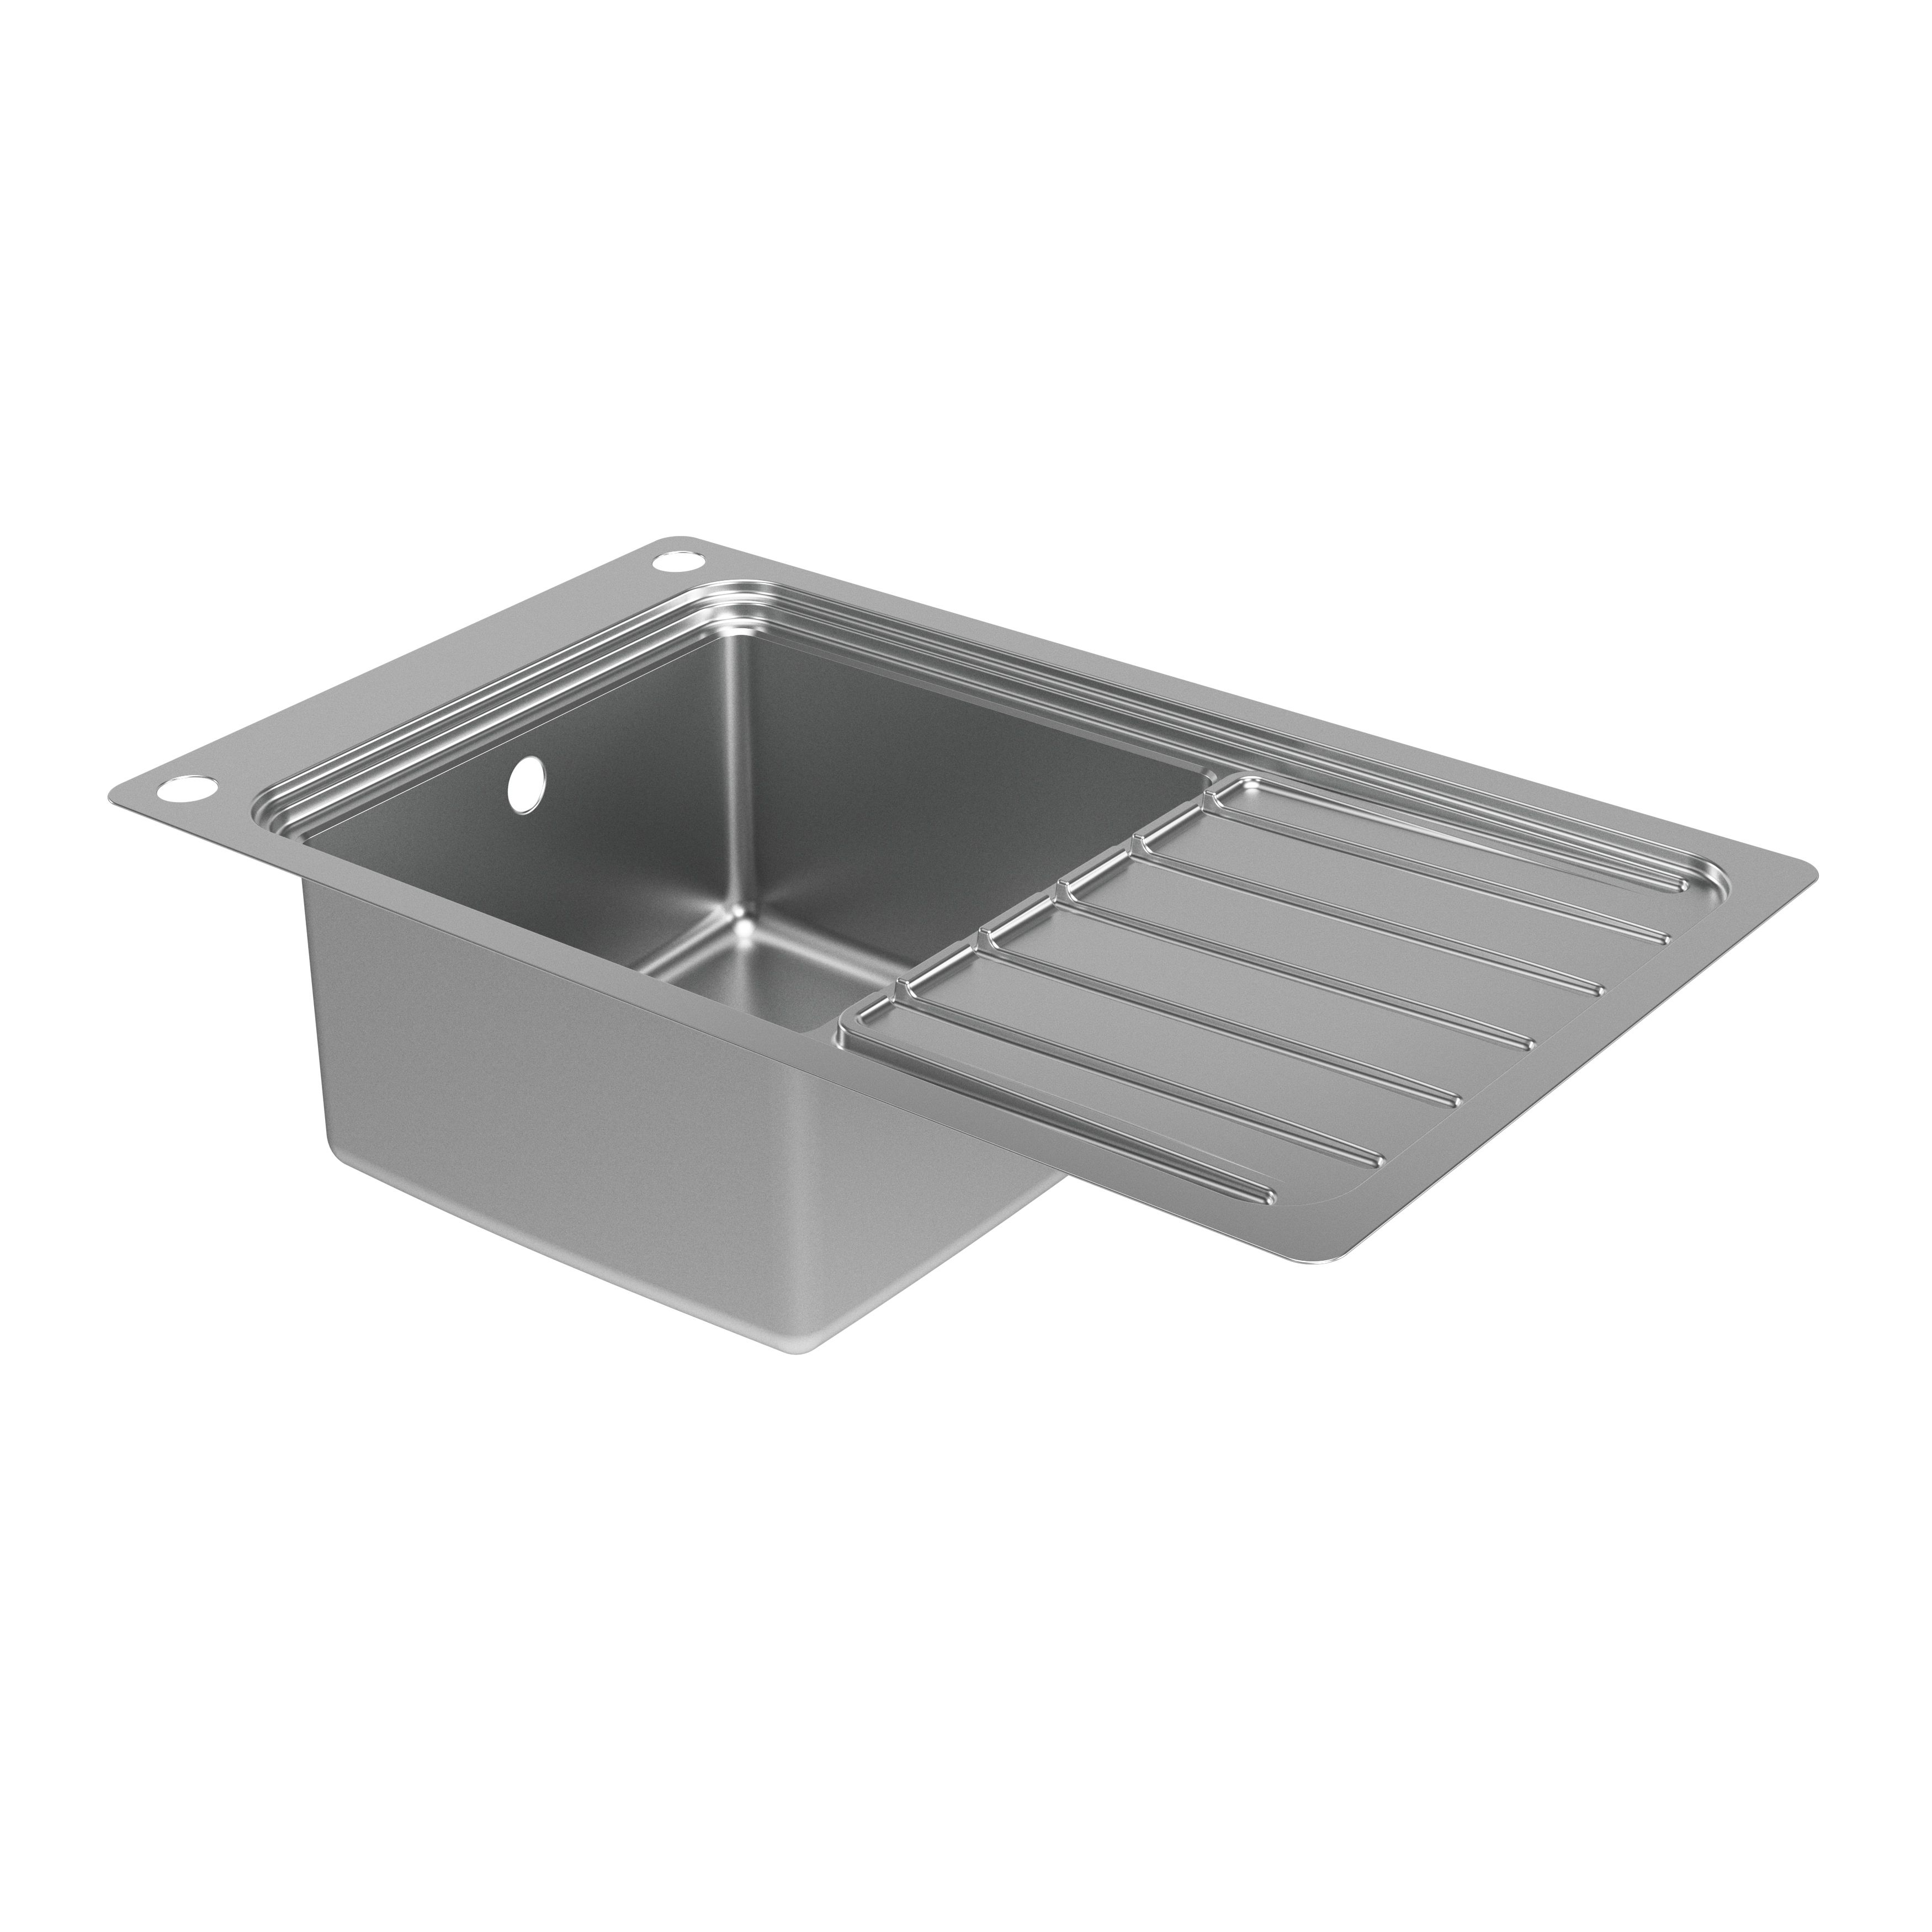 GoodHome Romesco Brushed Stainless steel 1 Bowl Kitchen sink With full drainer 510mm x 880mm